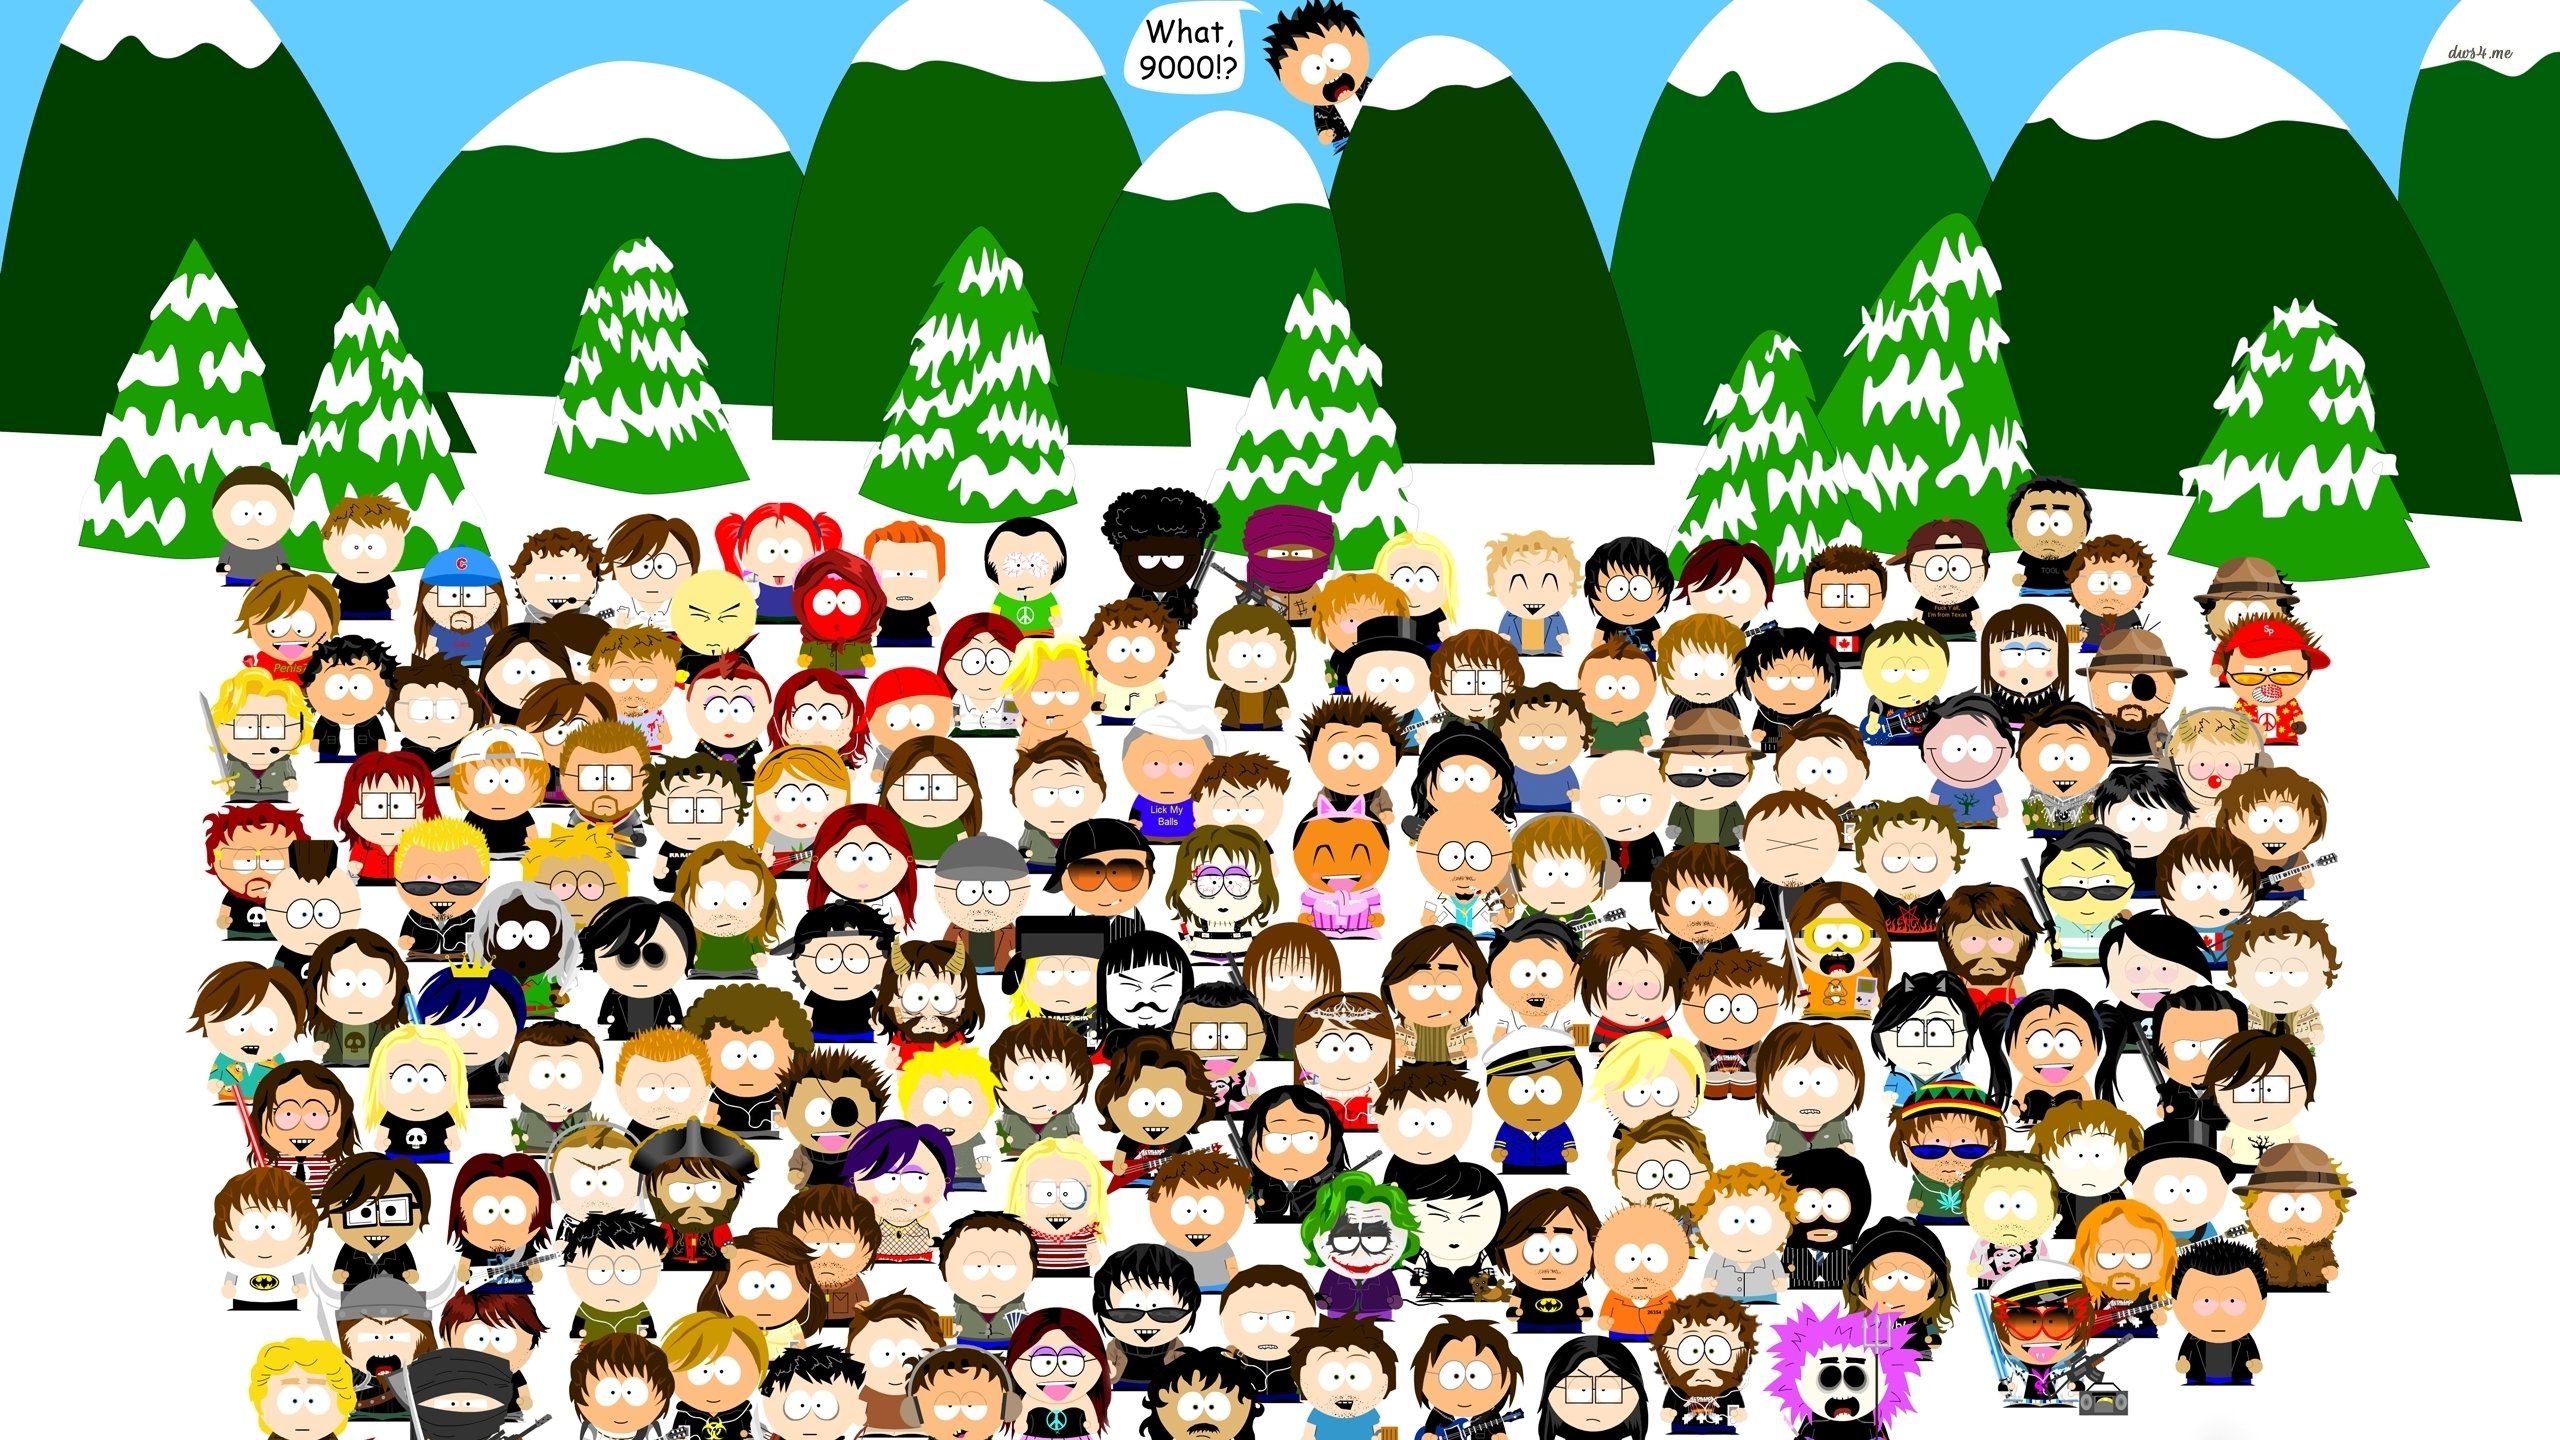 South Park characters on a winter day wallpaper wallpaper